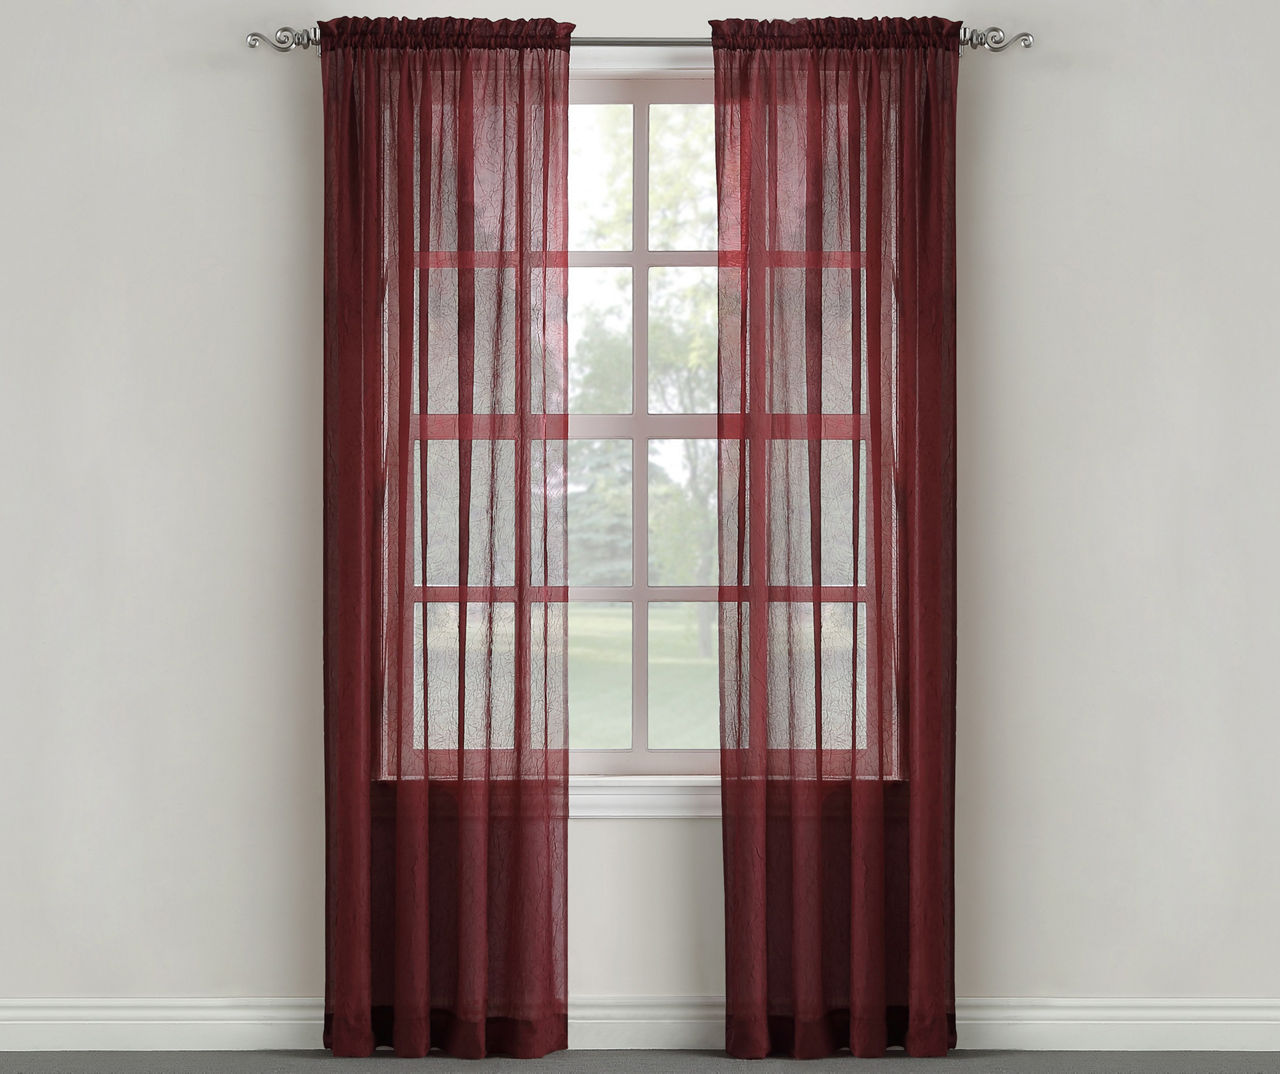 Sundried Tomato Crushed Voile Sheer Curtain Panel, (84")